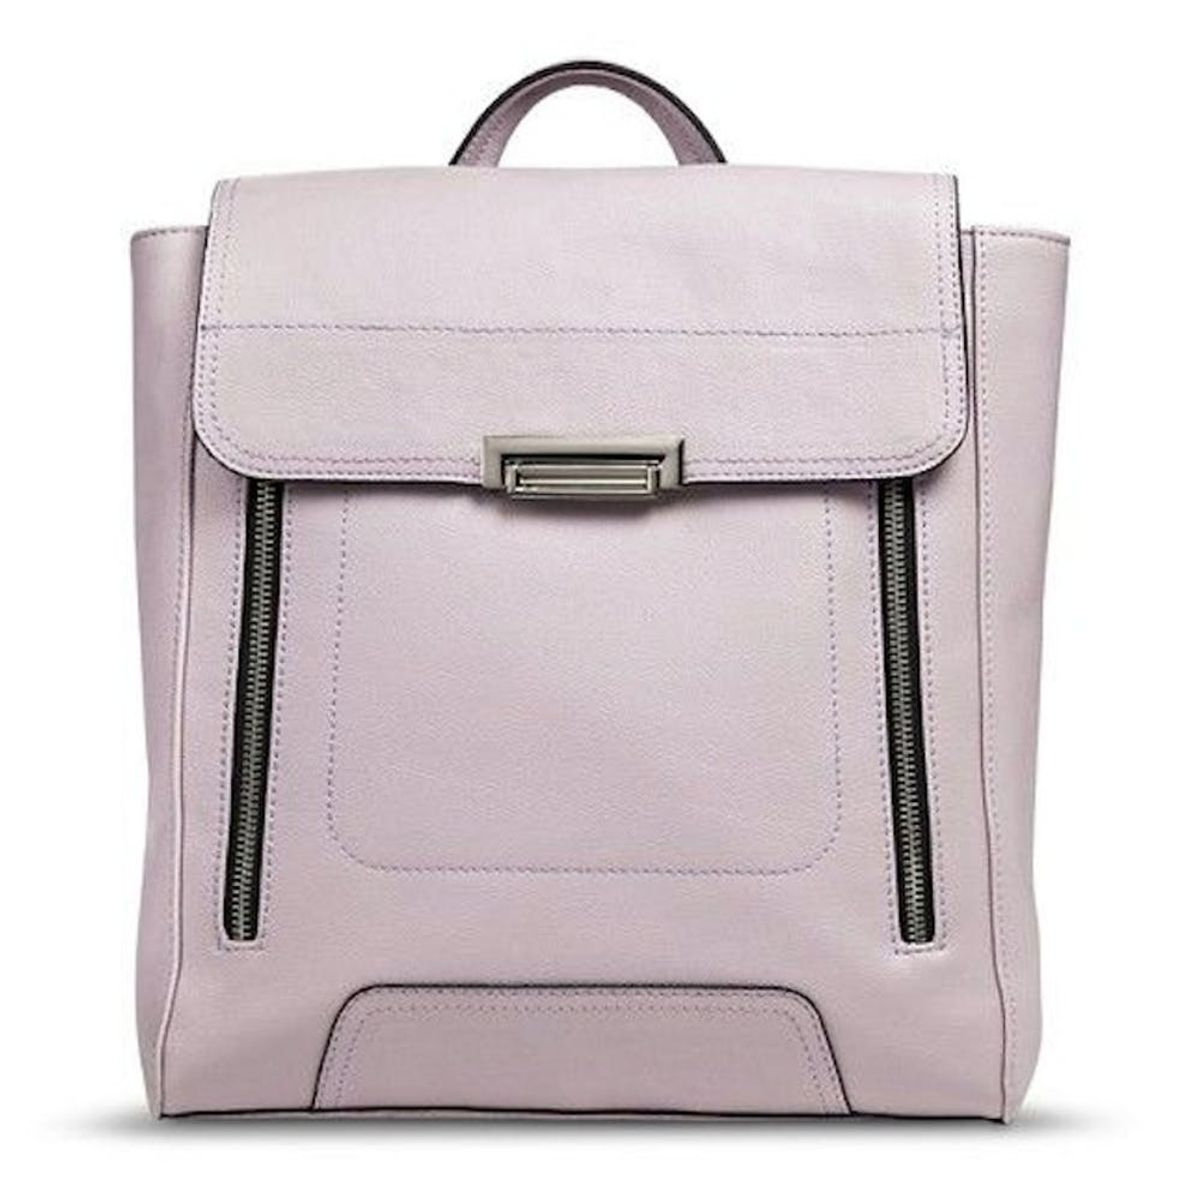 16 Stylish Backpacks That Will Take You from Day to Night